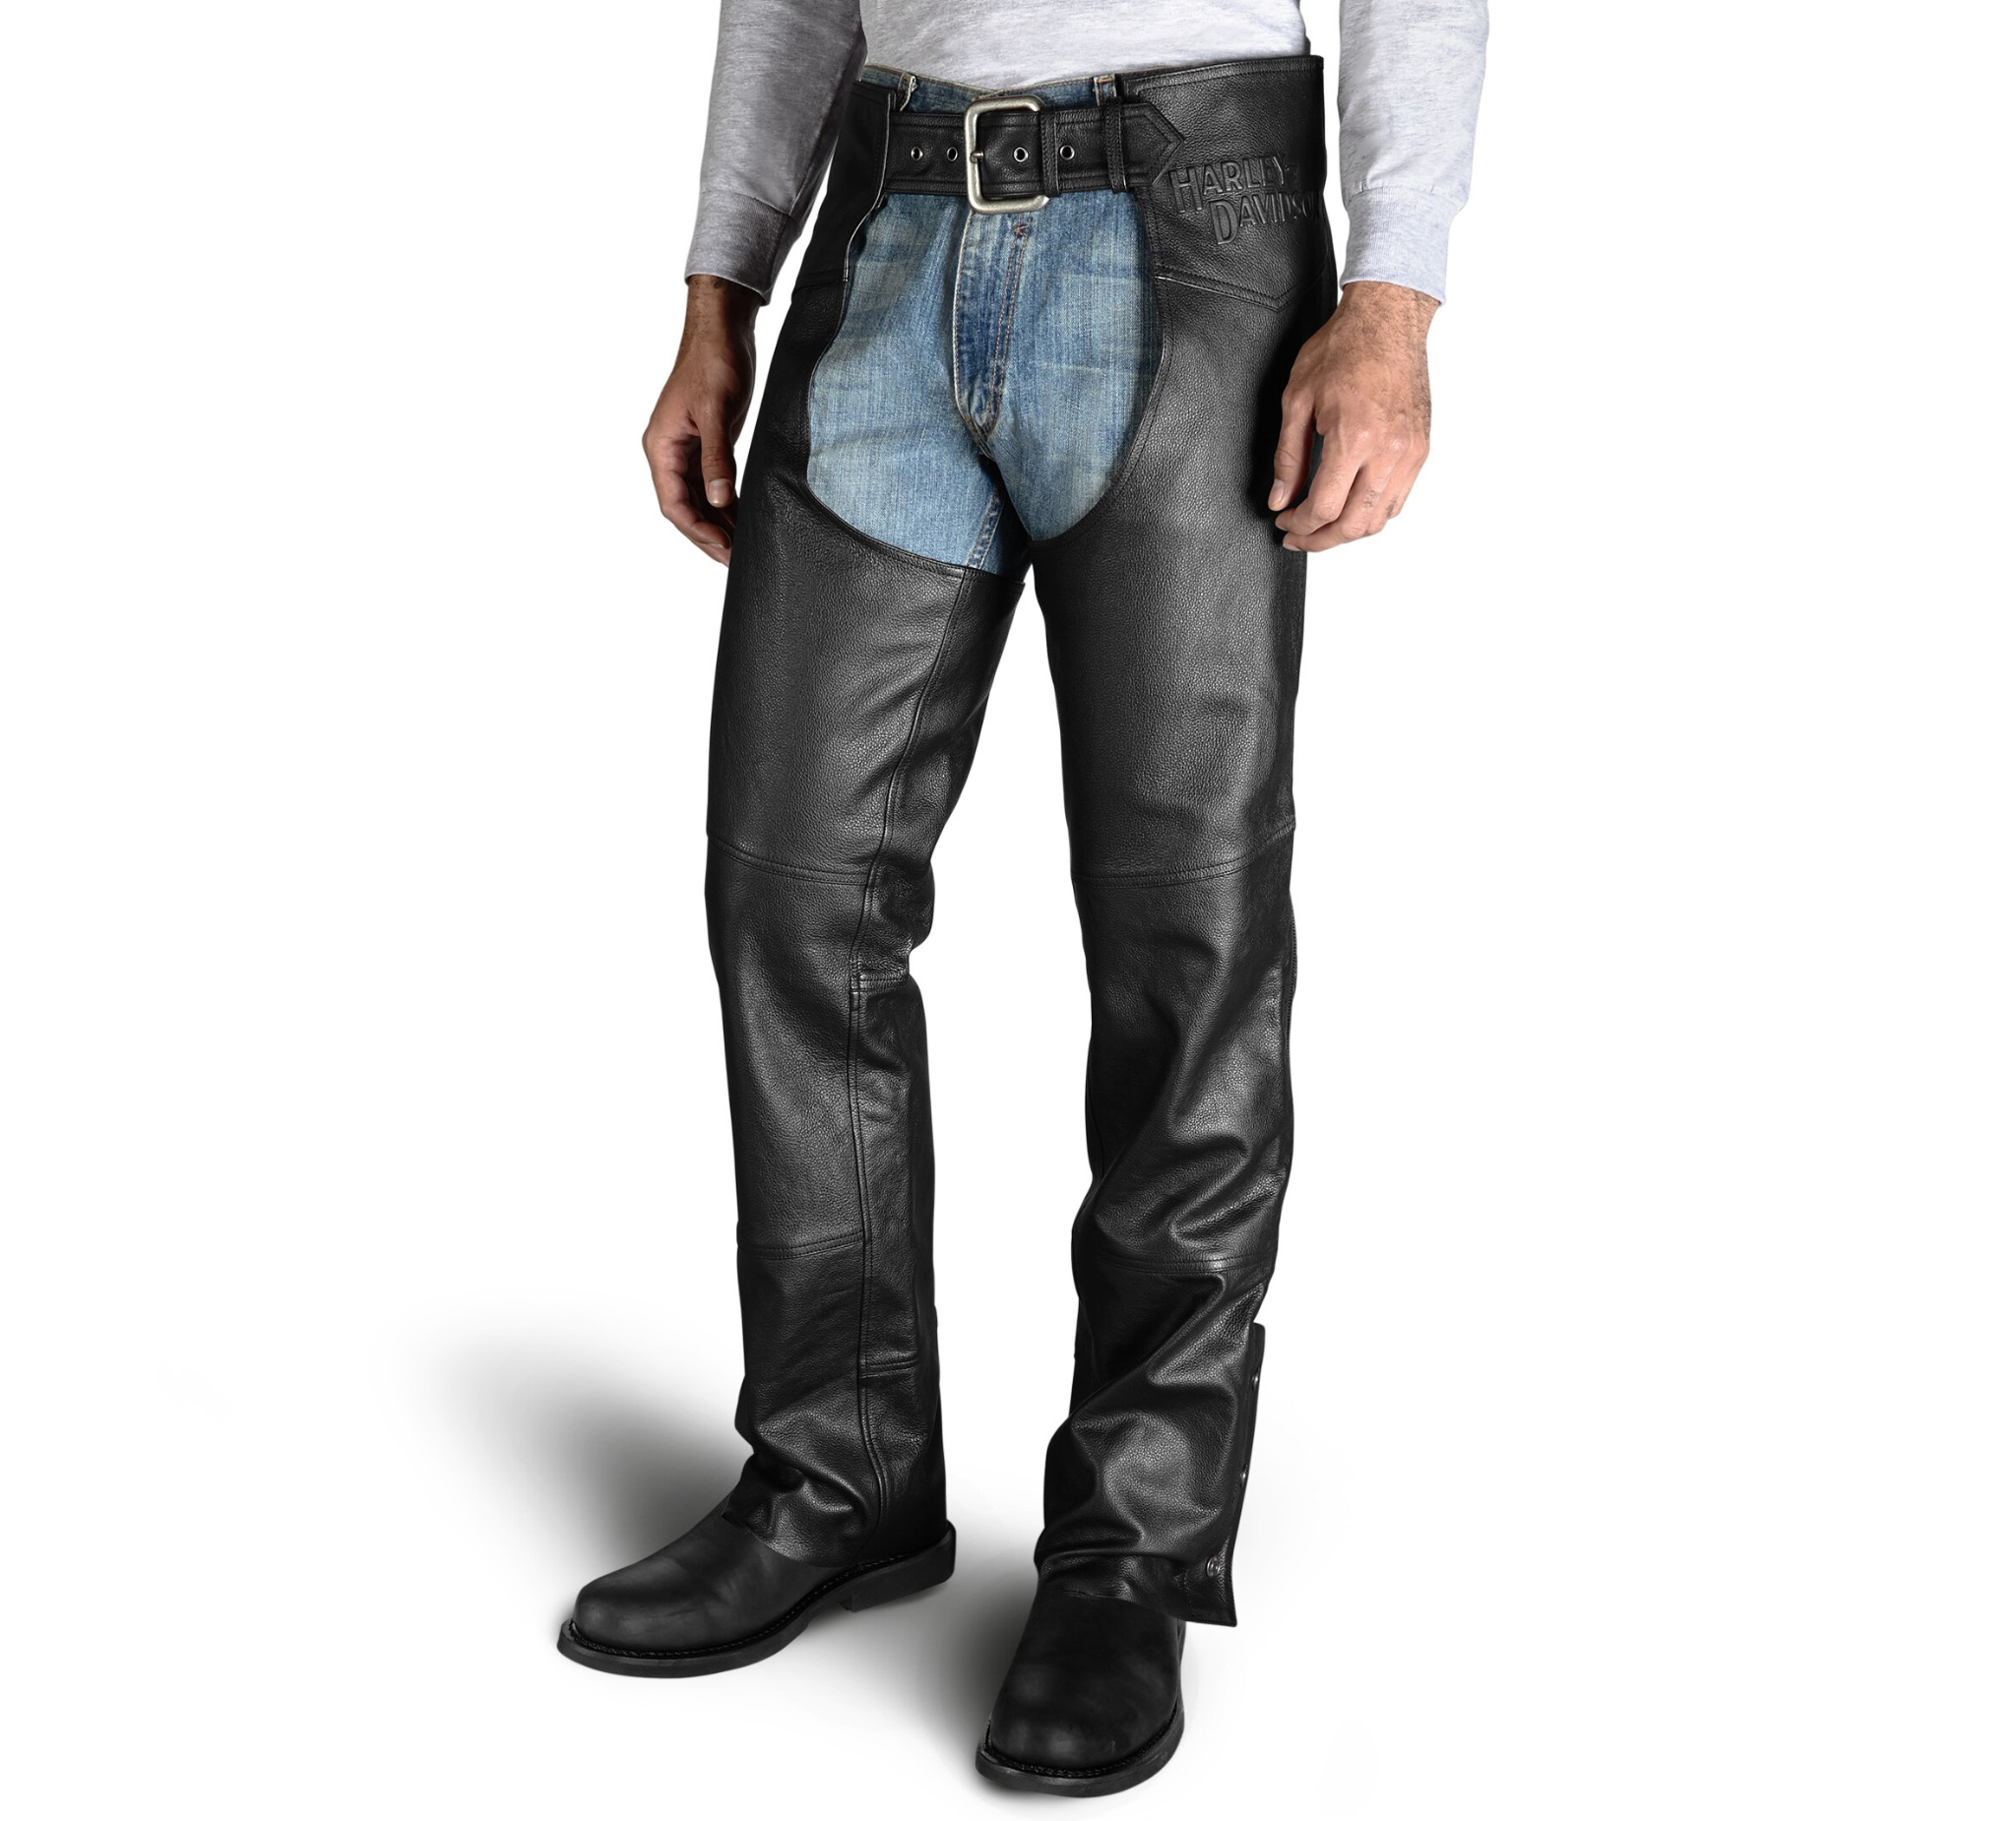 Best riding jeans with added protection – Riderz Planet